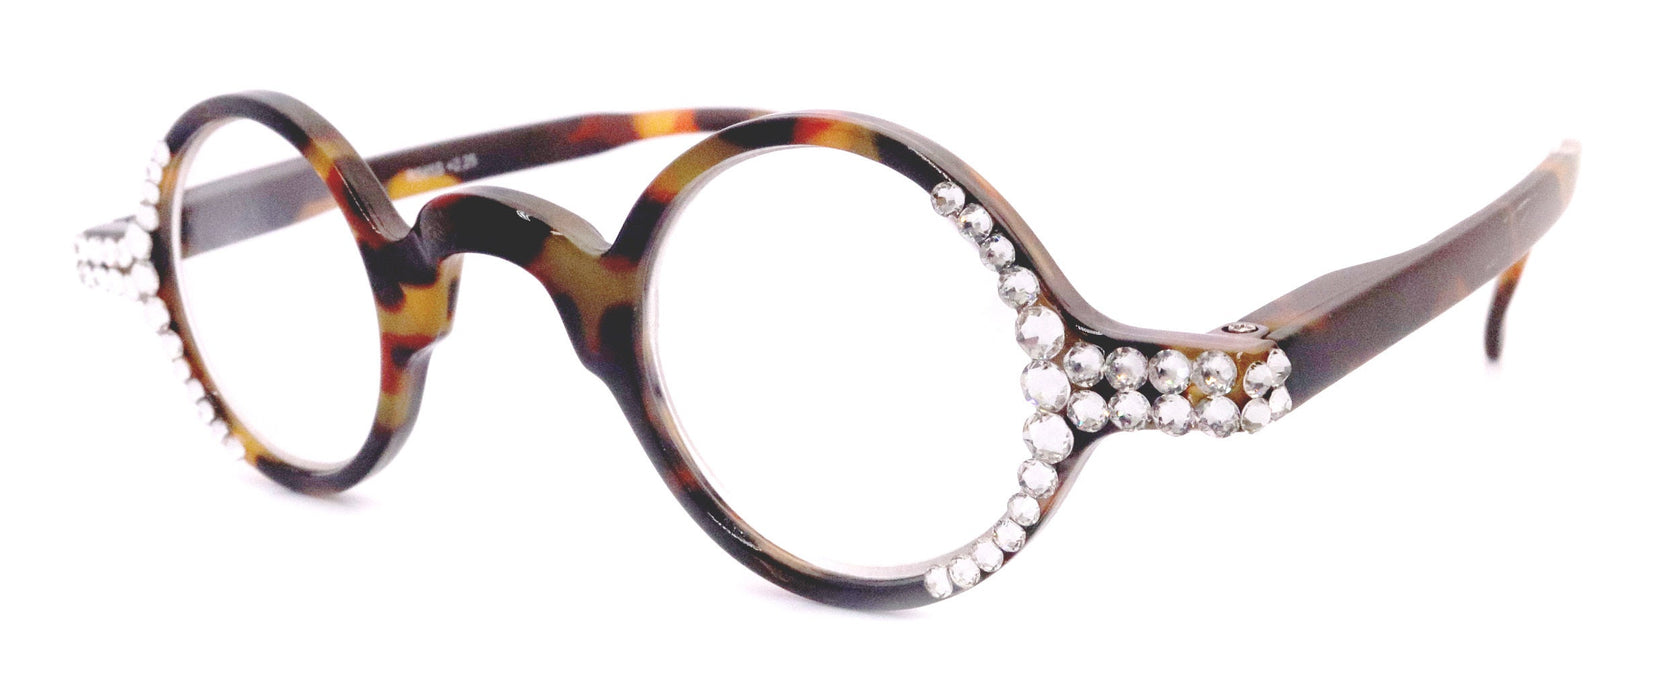 Picasso, (Bling) Women Reading Glasses W Clear Genuine European Crystals, Round (Brown) Tortoiseshell. NY Fifth Avenue